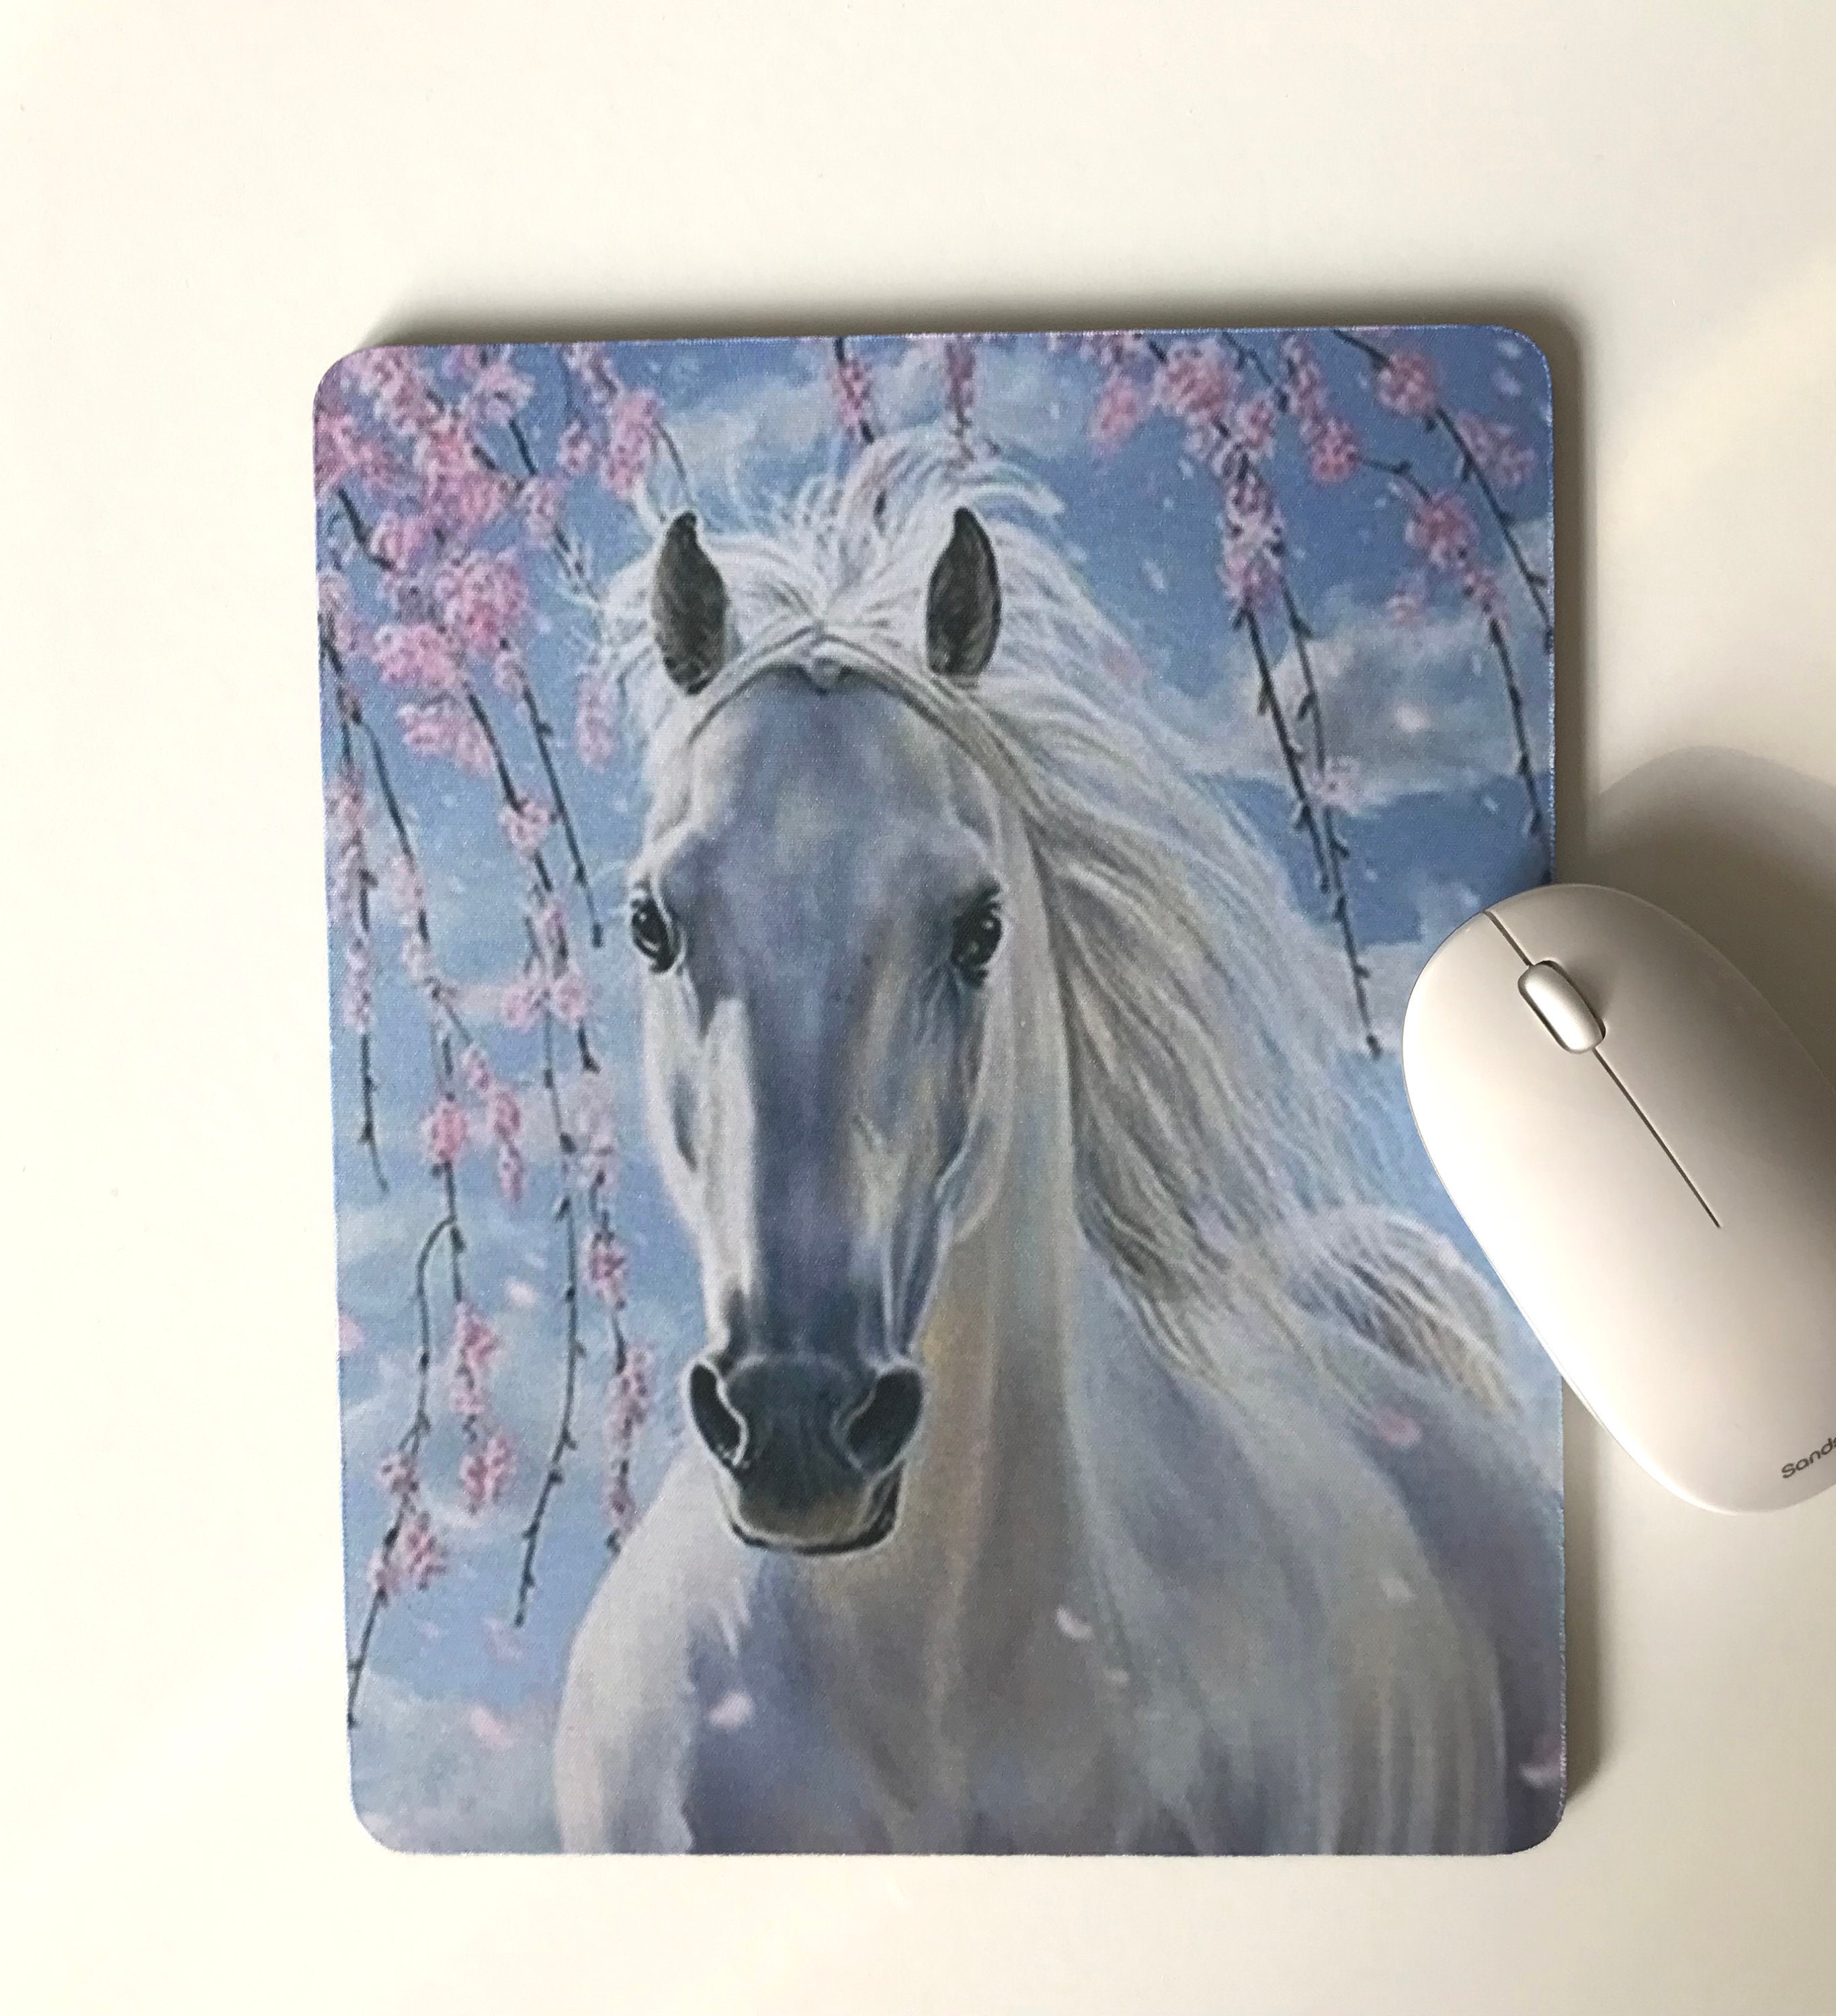 Techsource Mousepad Topo White XL, 2XL and 3XL With Stitched Edges, Nonslip  Rubber Base Machine Washable Speed and Control -  UK